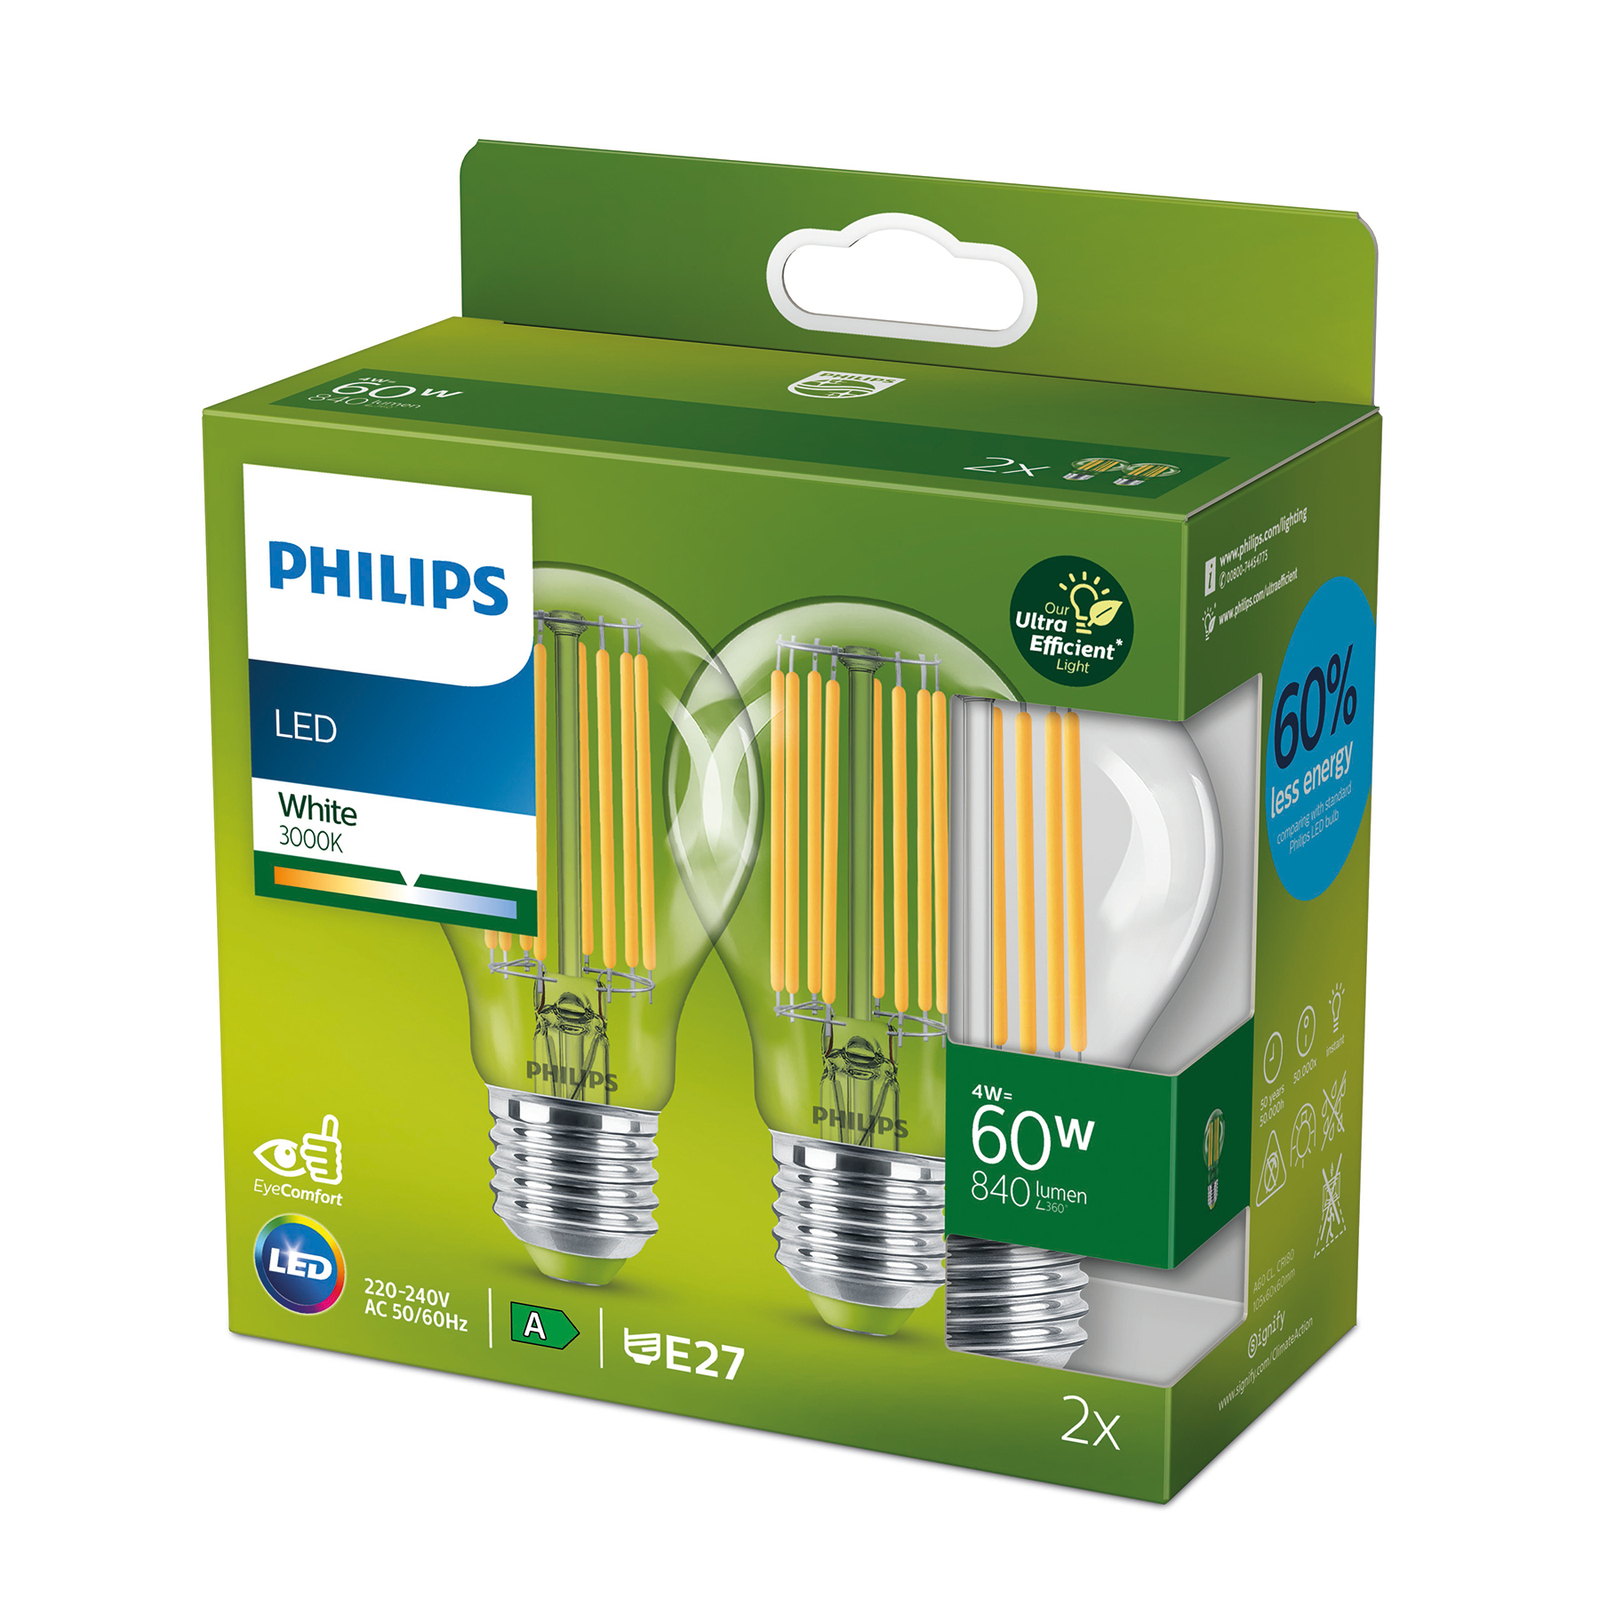 Philips LED E27 A60 4 W 840 lm claire 3 000 K x2